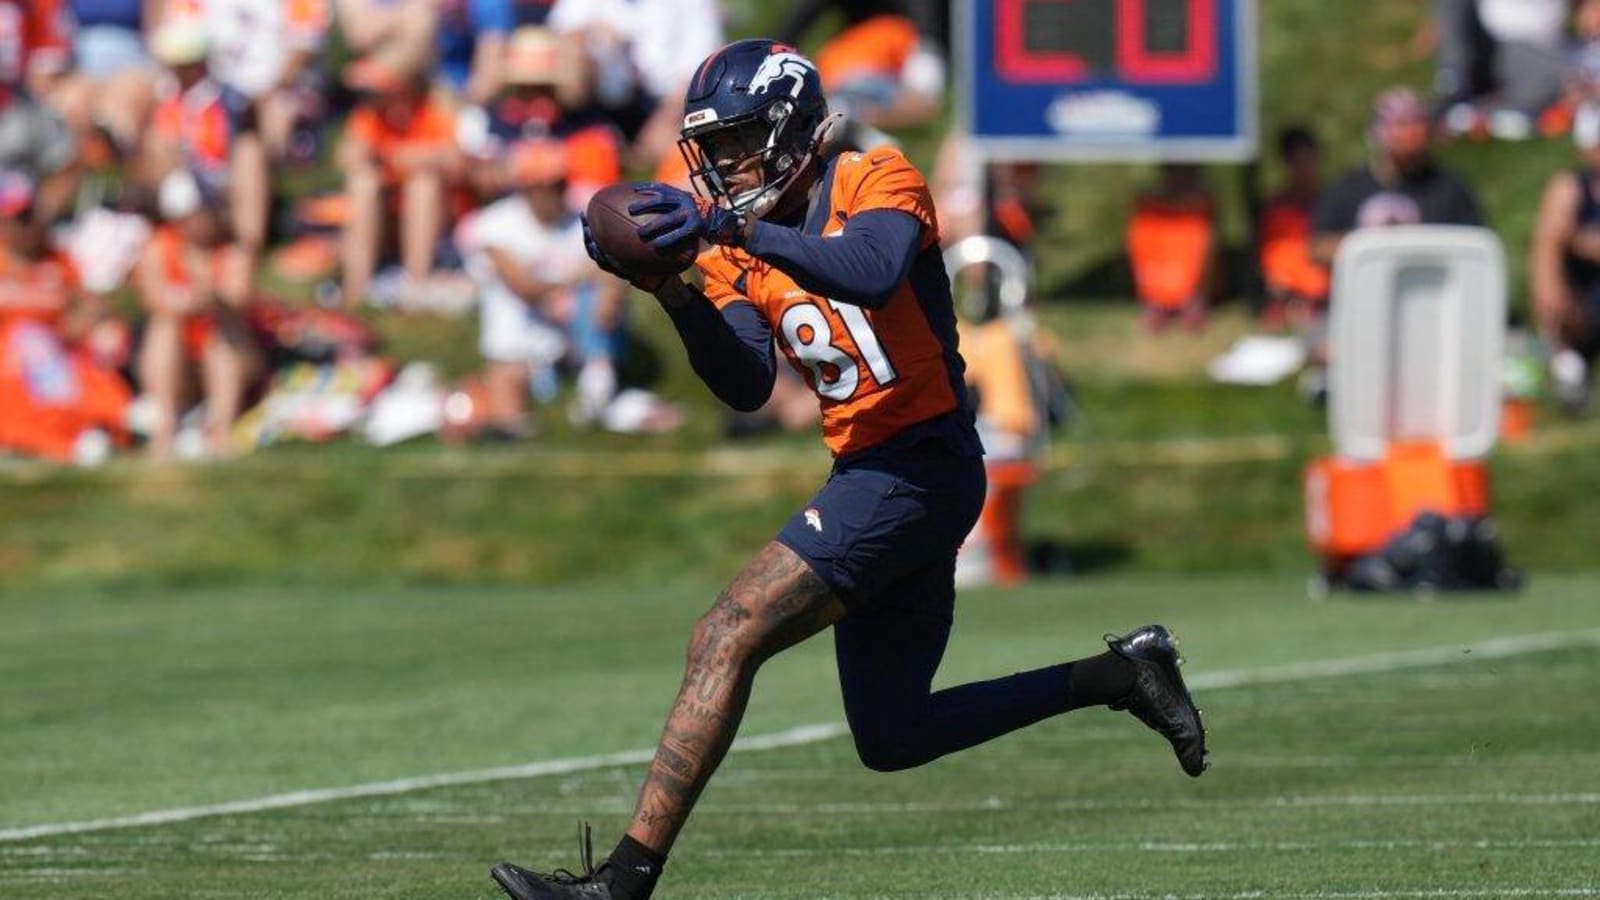 Broncos Roster Set but the Receiving Corps is IN-COM-PLETE!